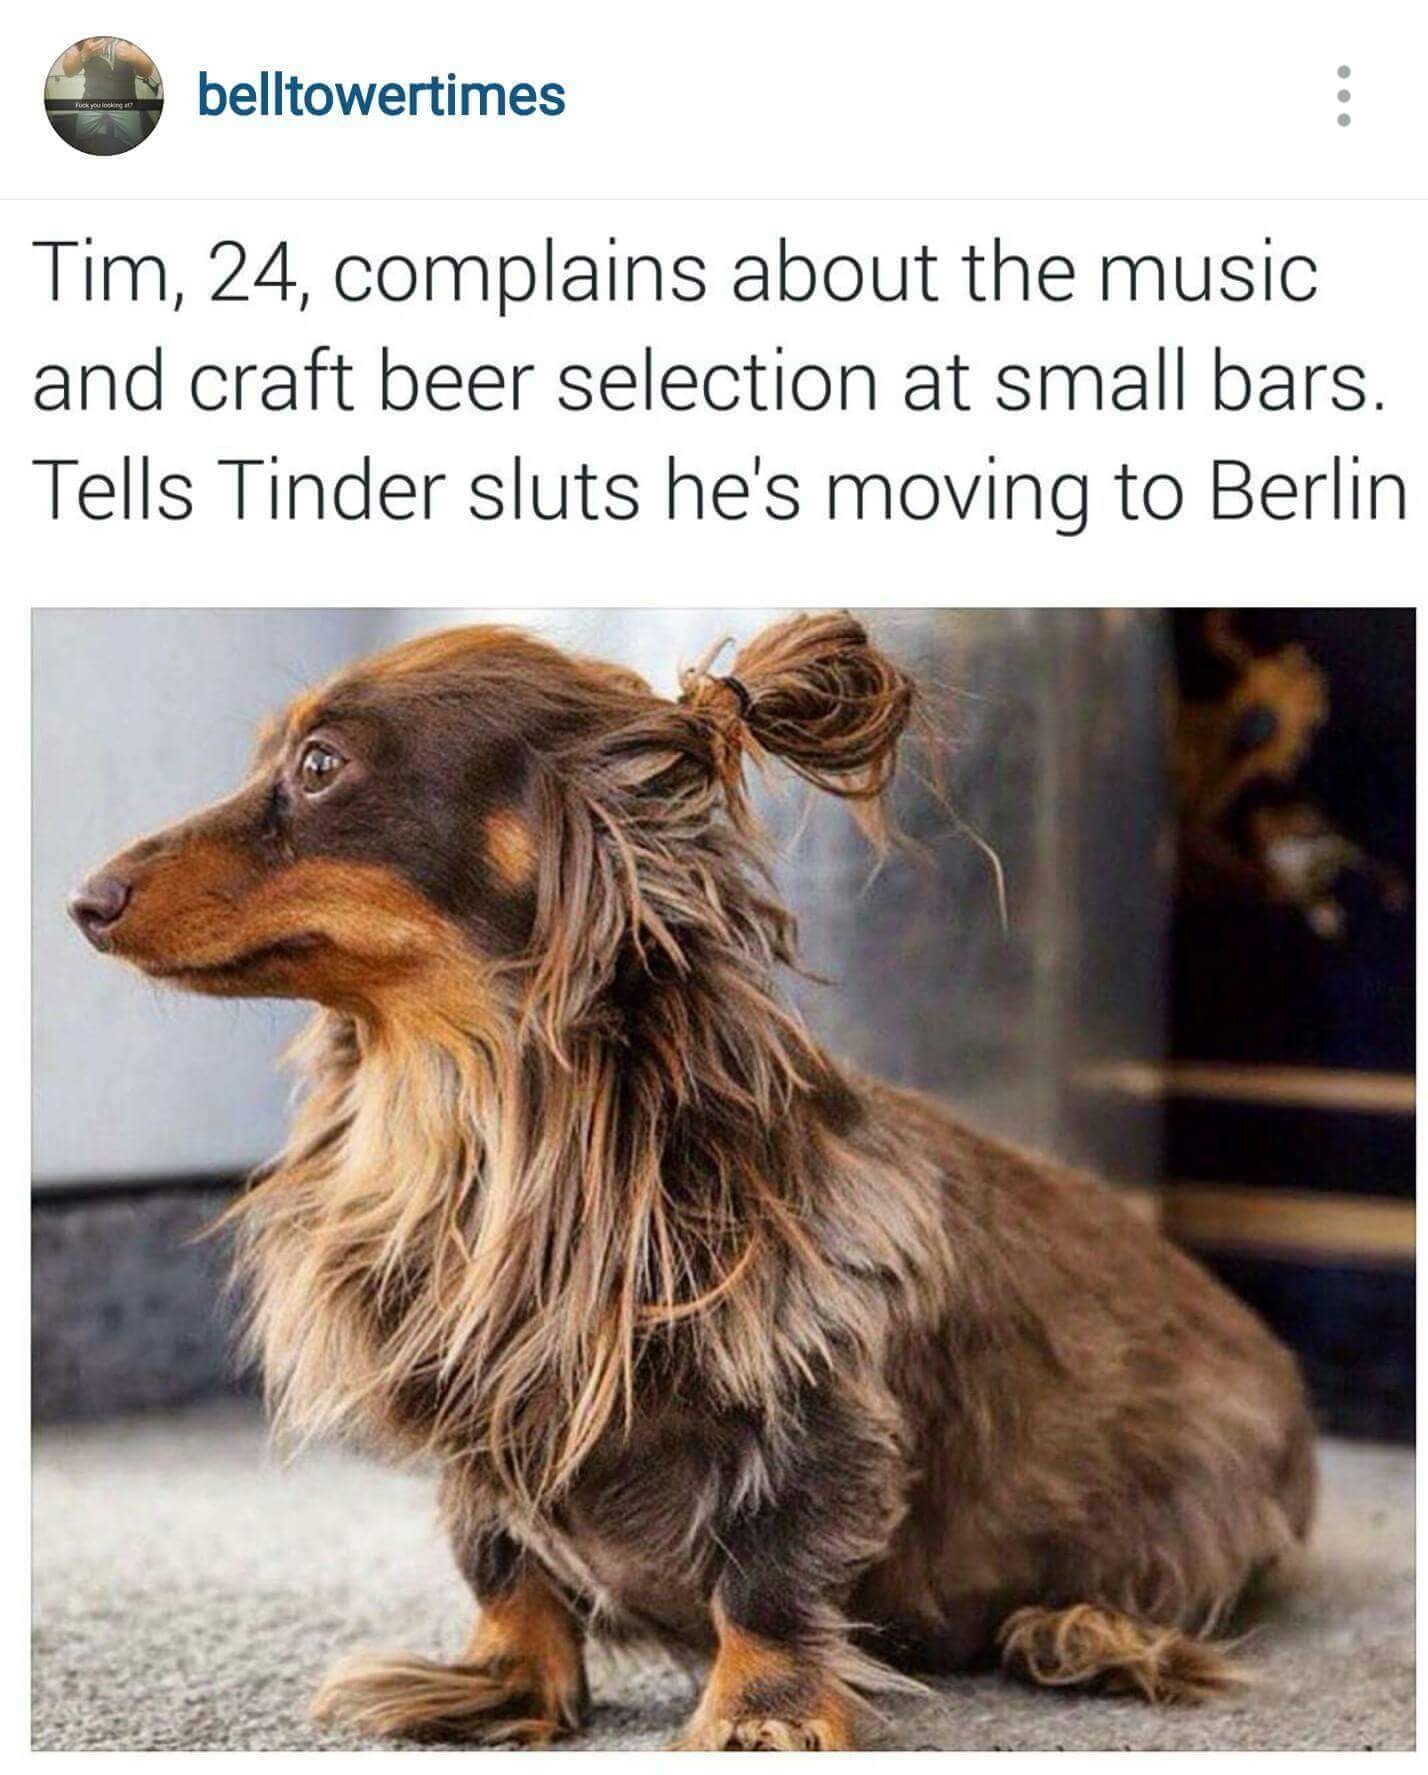 memes - hipster dachshund - belltowertimes Tim, 24, complains about the music and craft beer selection at small bars. Tells Tinder sluts he's moving to Berlin